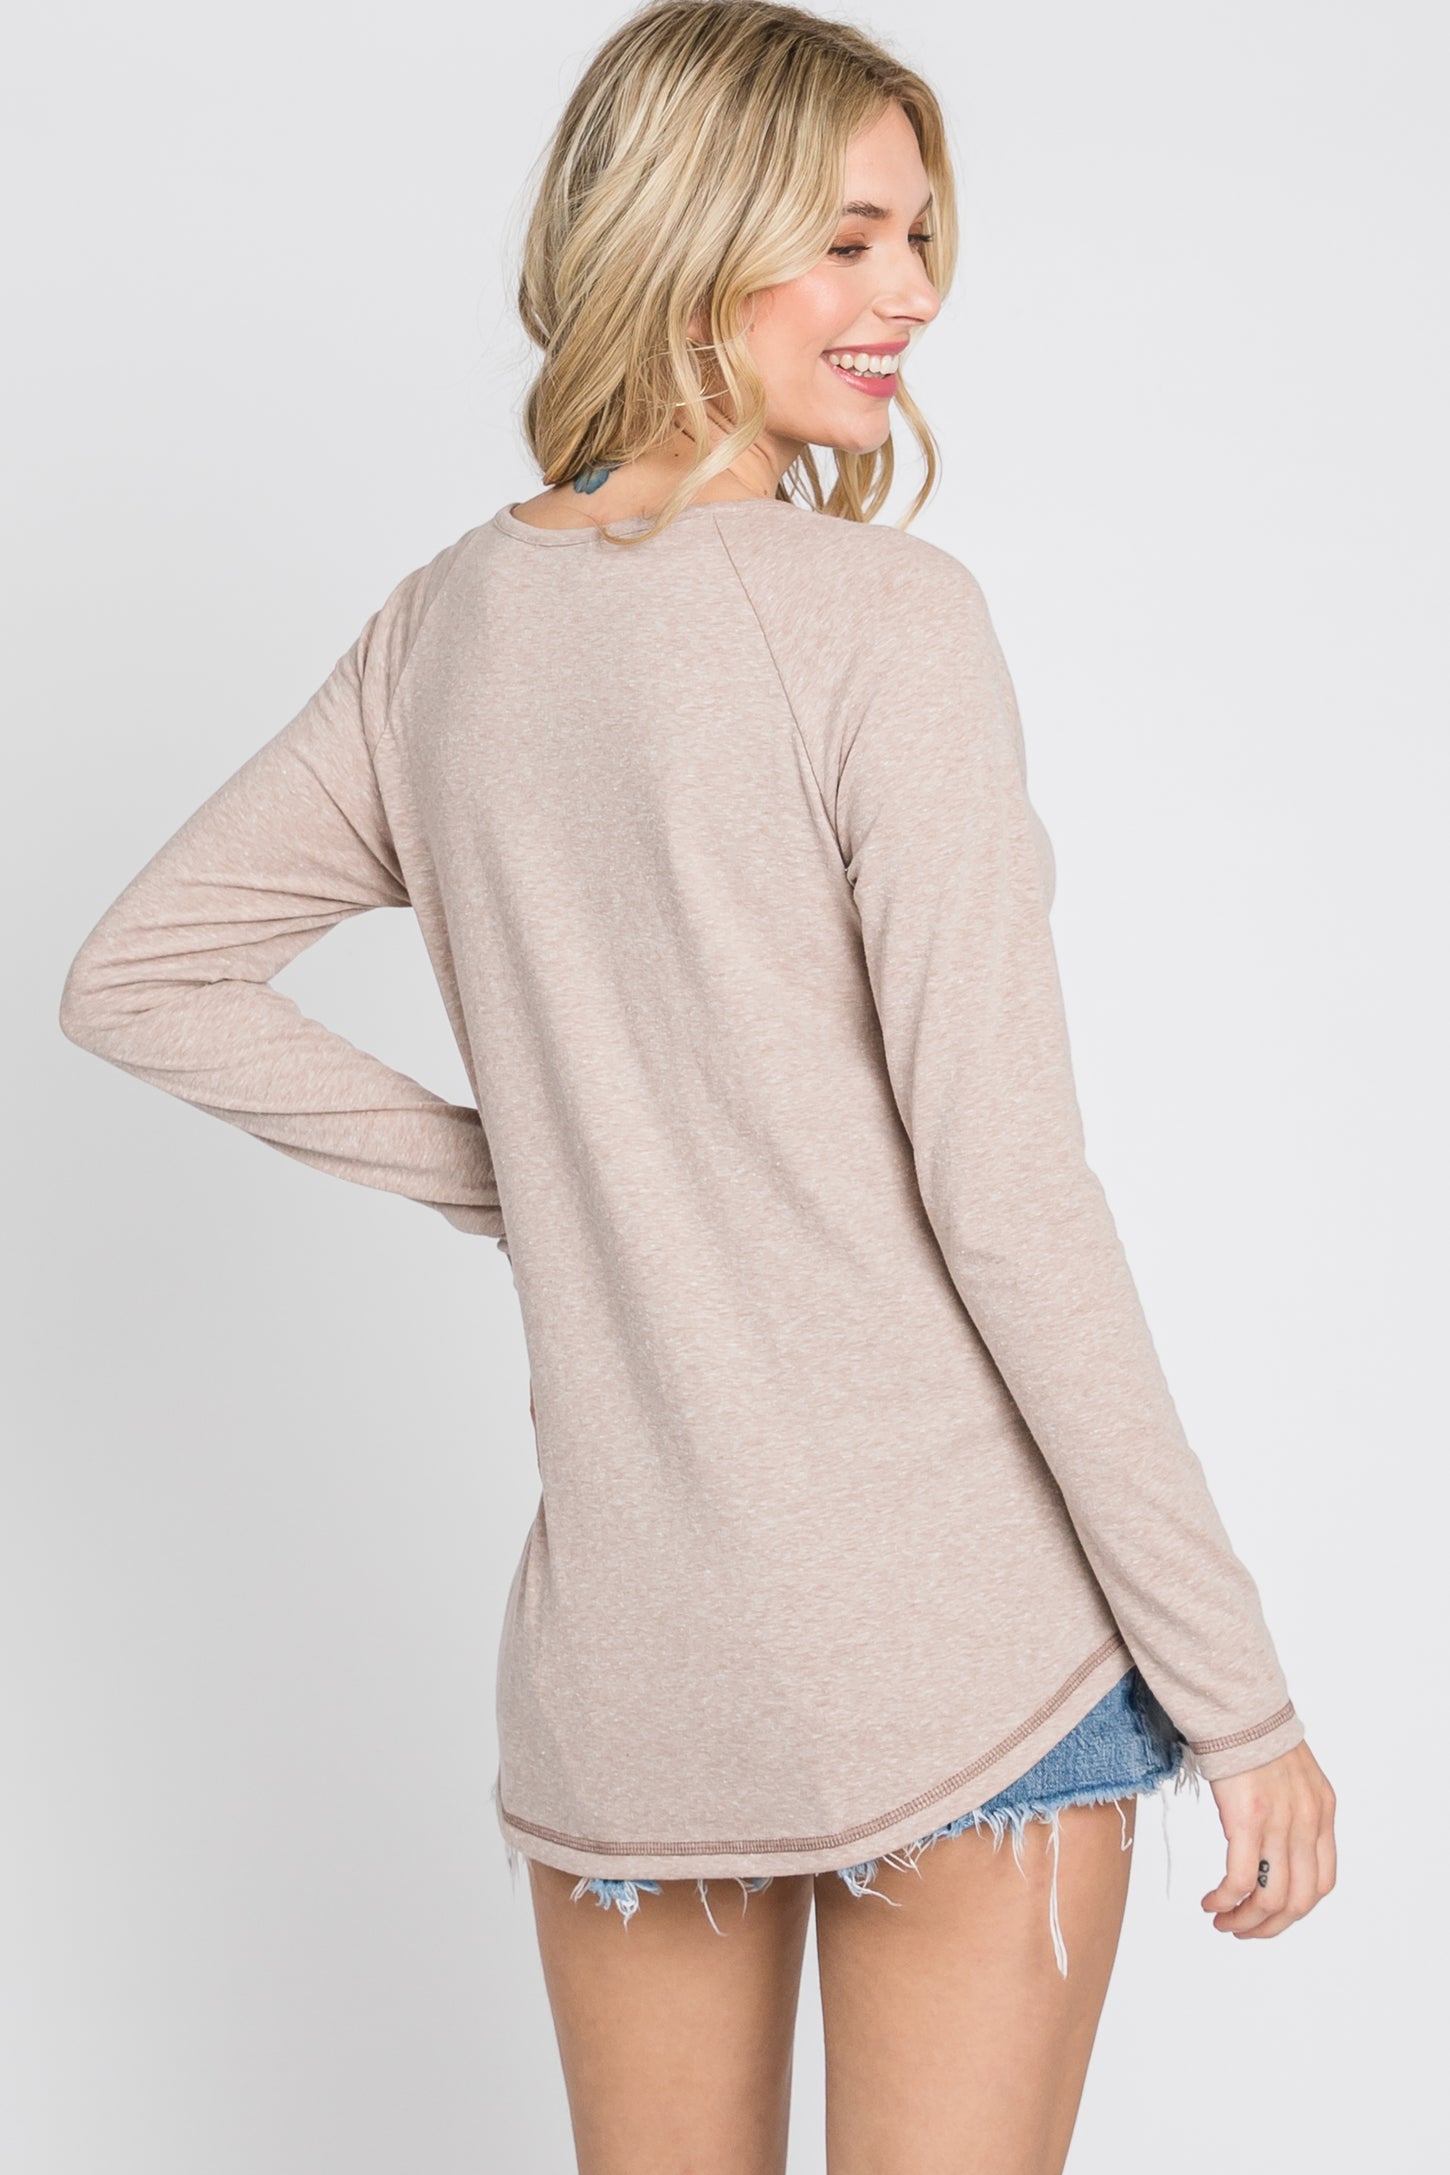 Taupe Contrast Stitched Long Sleeve Top